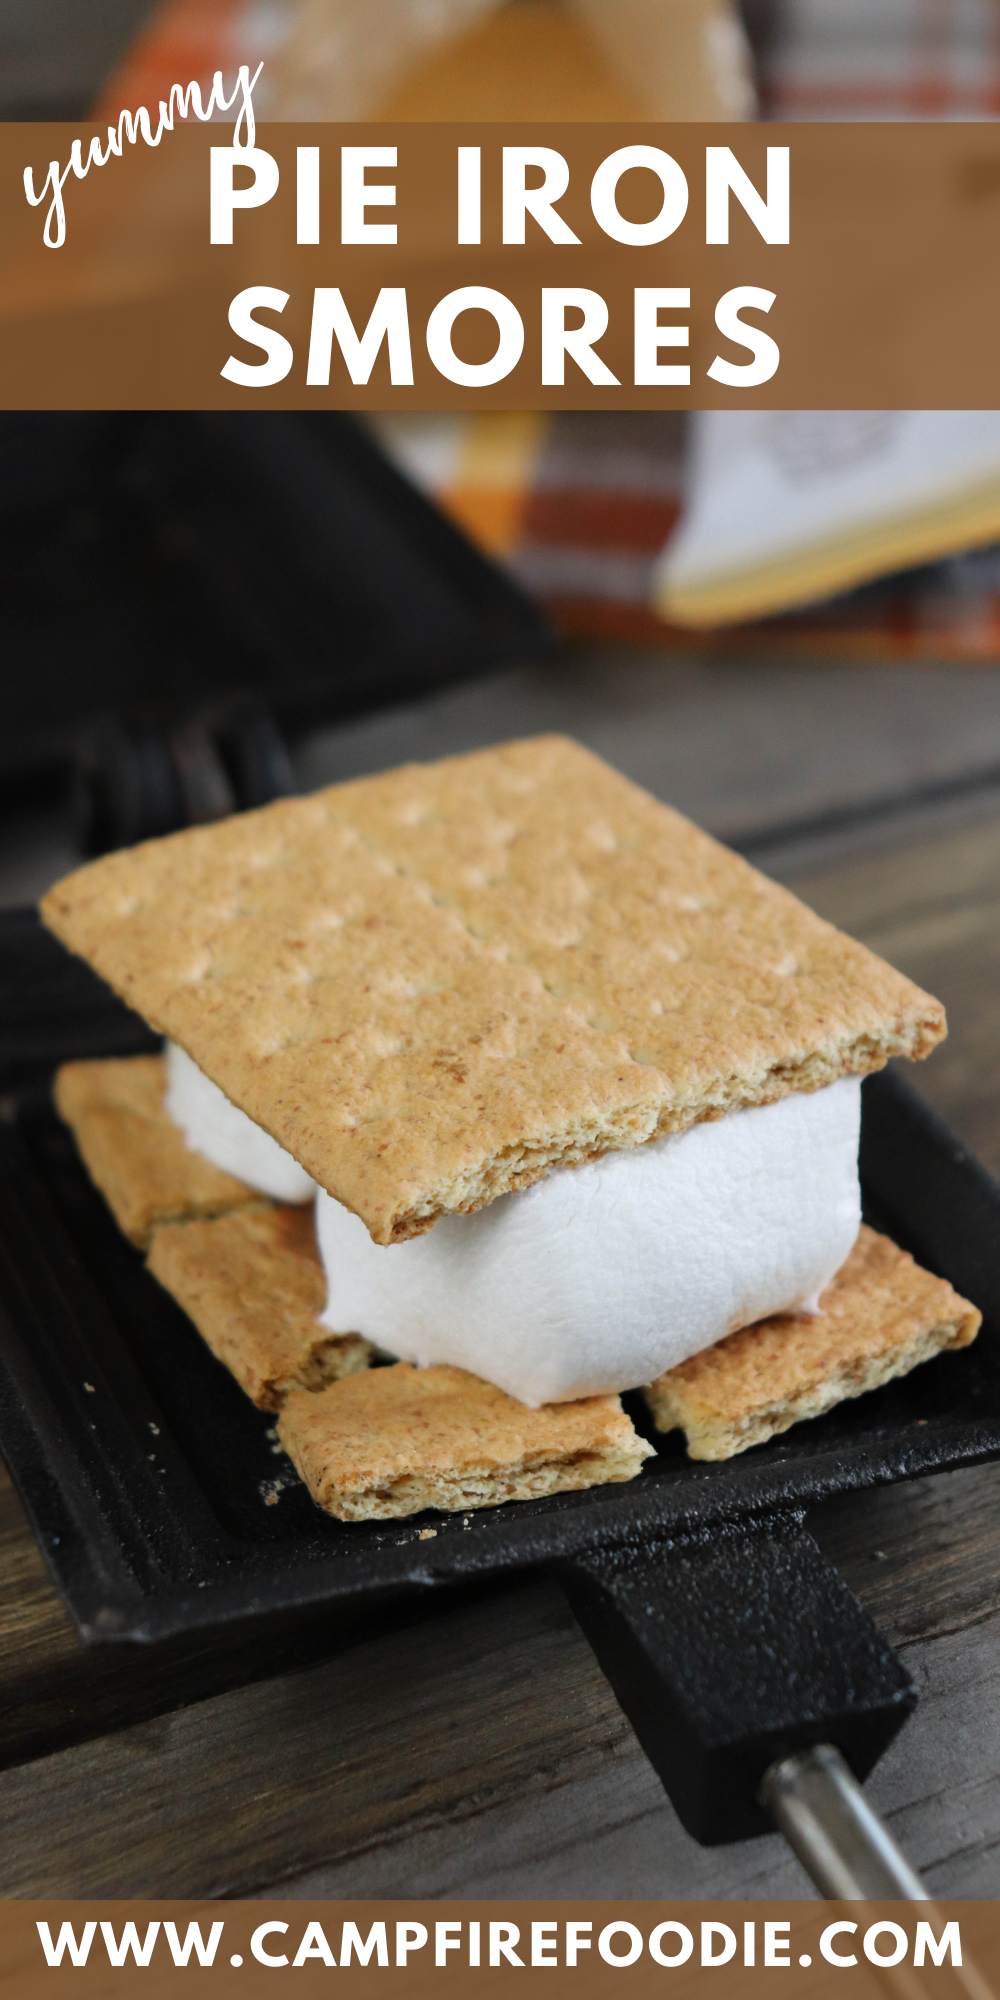 https://campfirefoodie.com/wp-content/uploads/2021/02/Pie-Iron-Smores.png